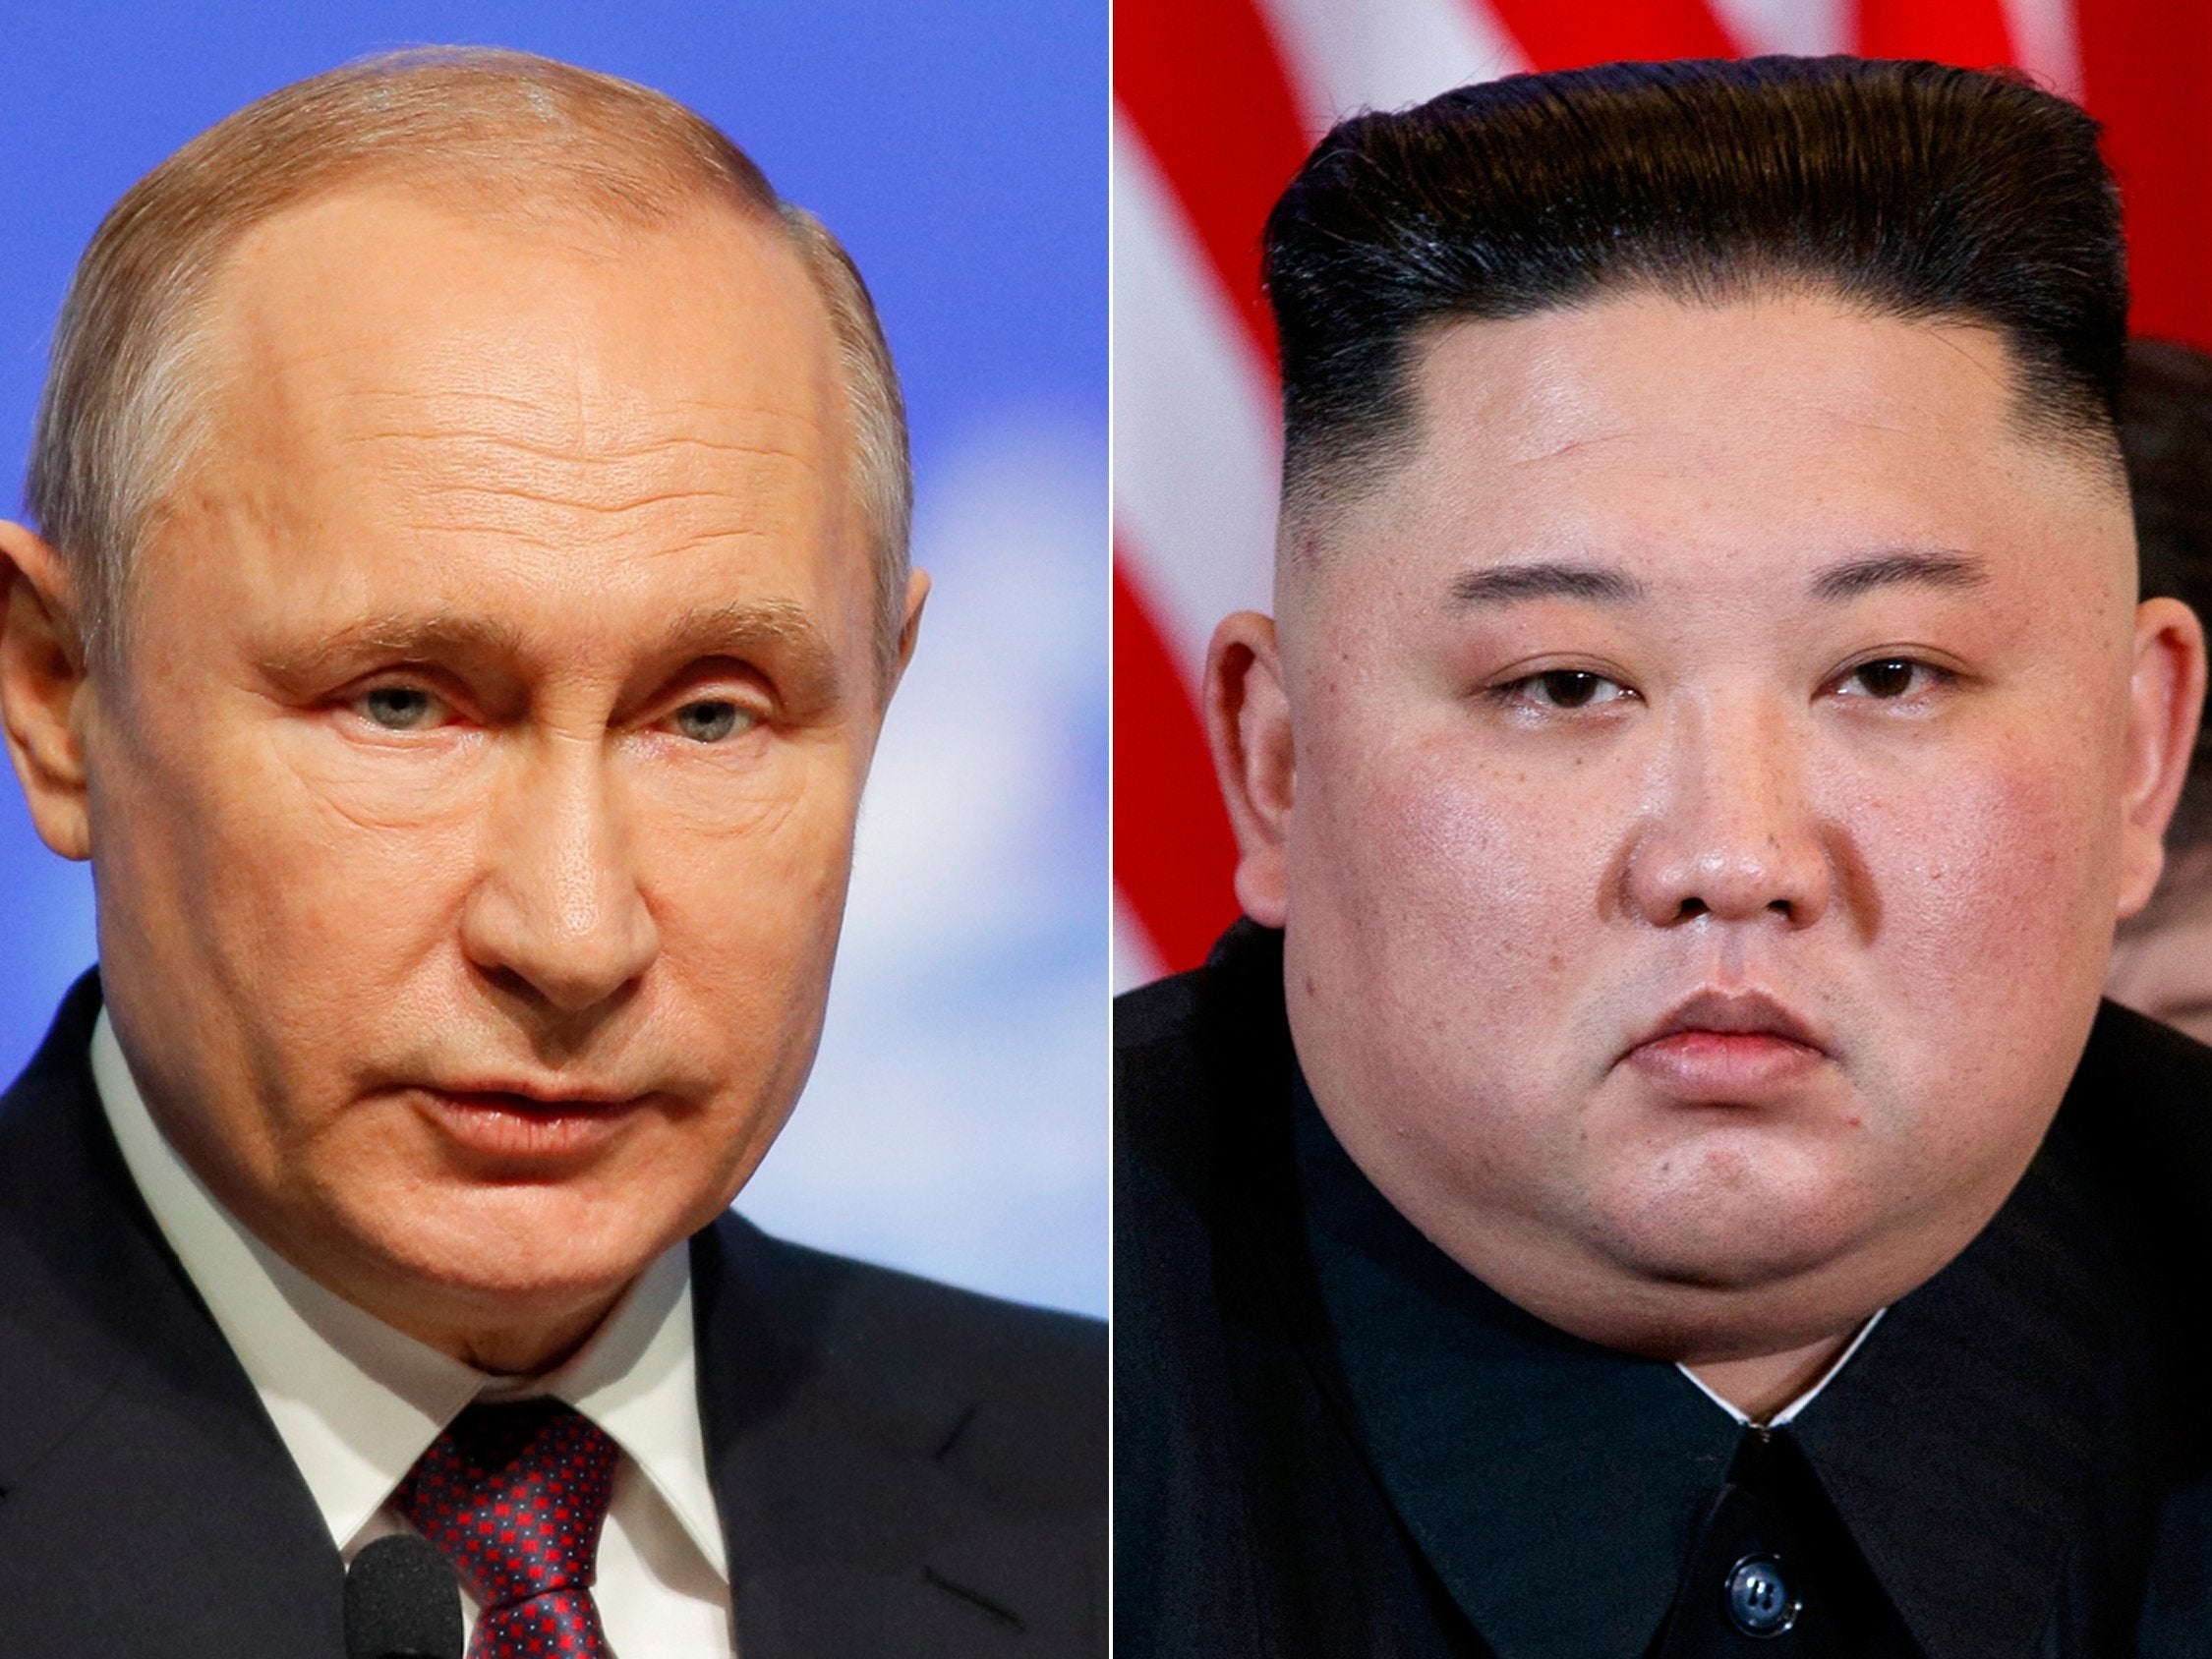 When Putin and Jong-un meet for their first one-on-one meeting, the latter will have a long wish list and a strong desire to notch a win after the failure of his second summit with Donald Trump in February 2019